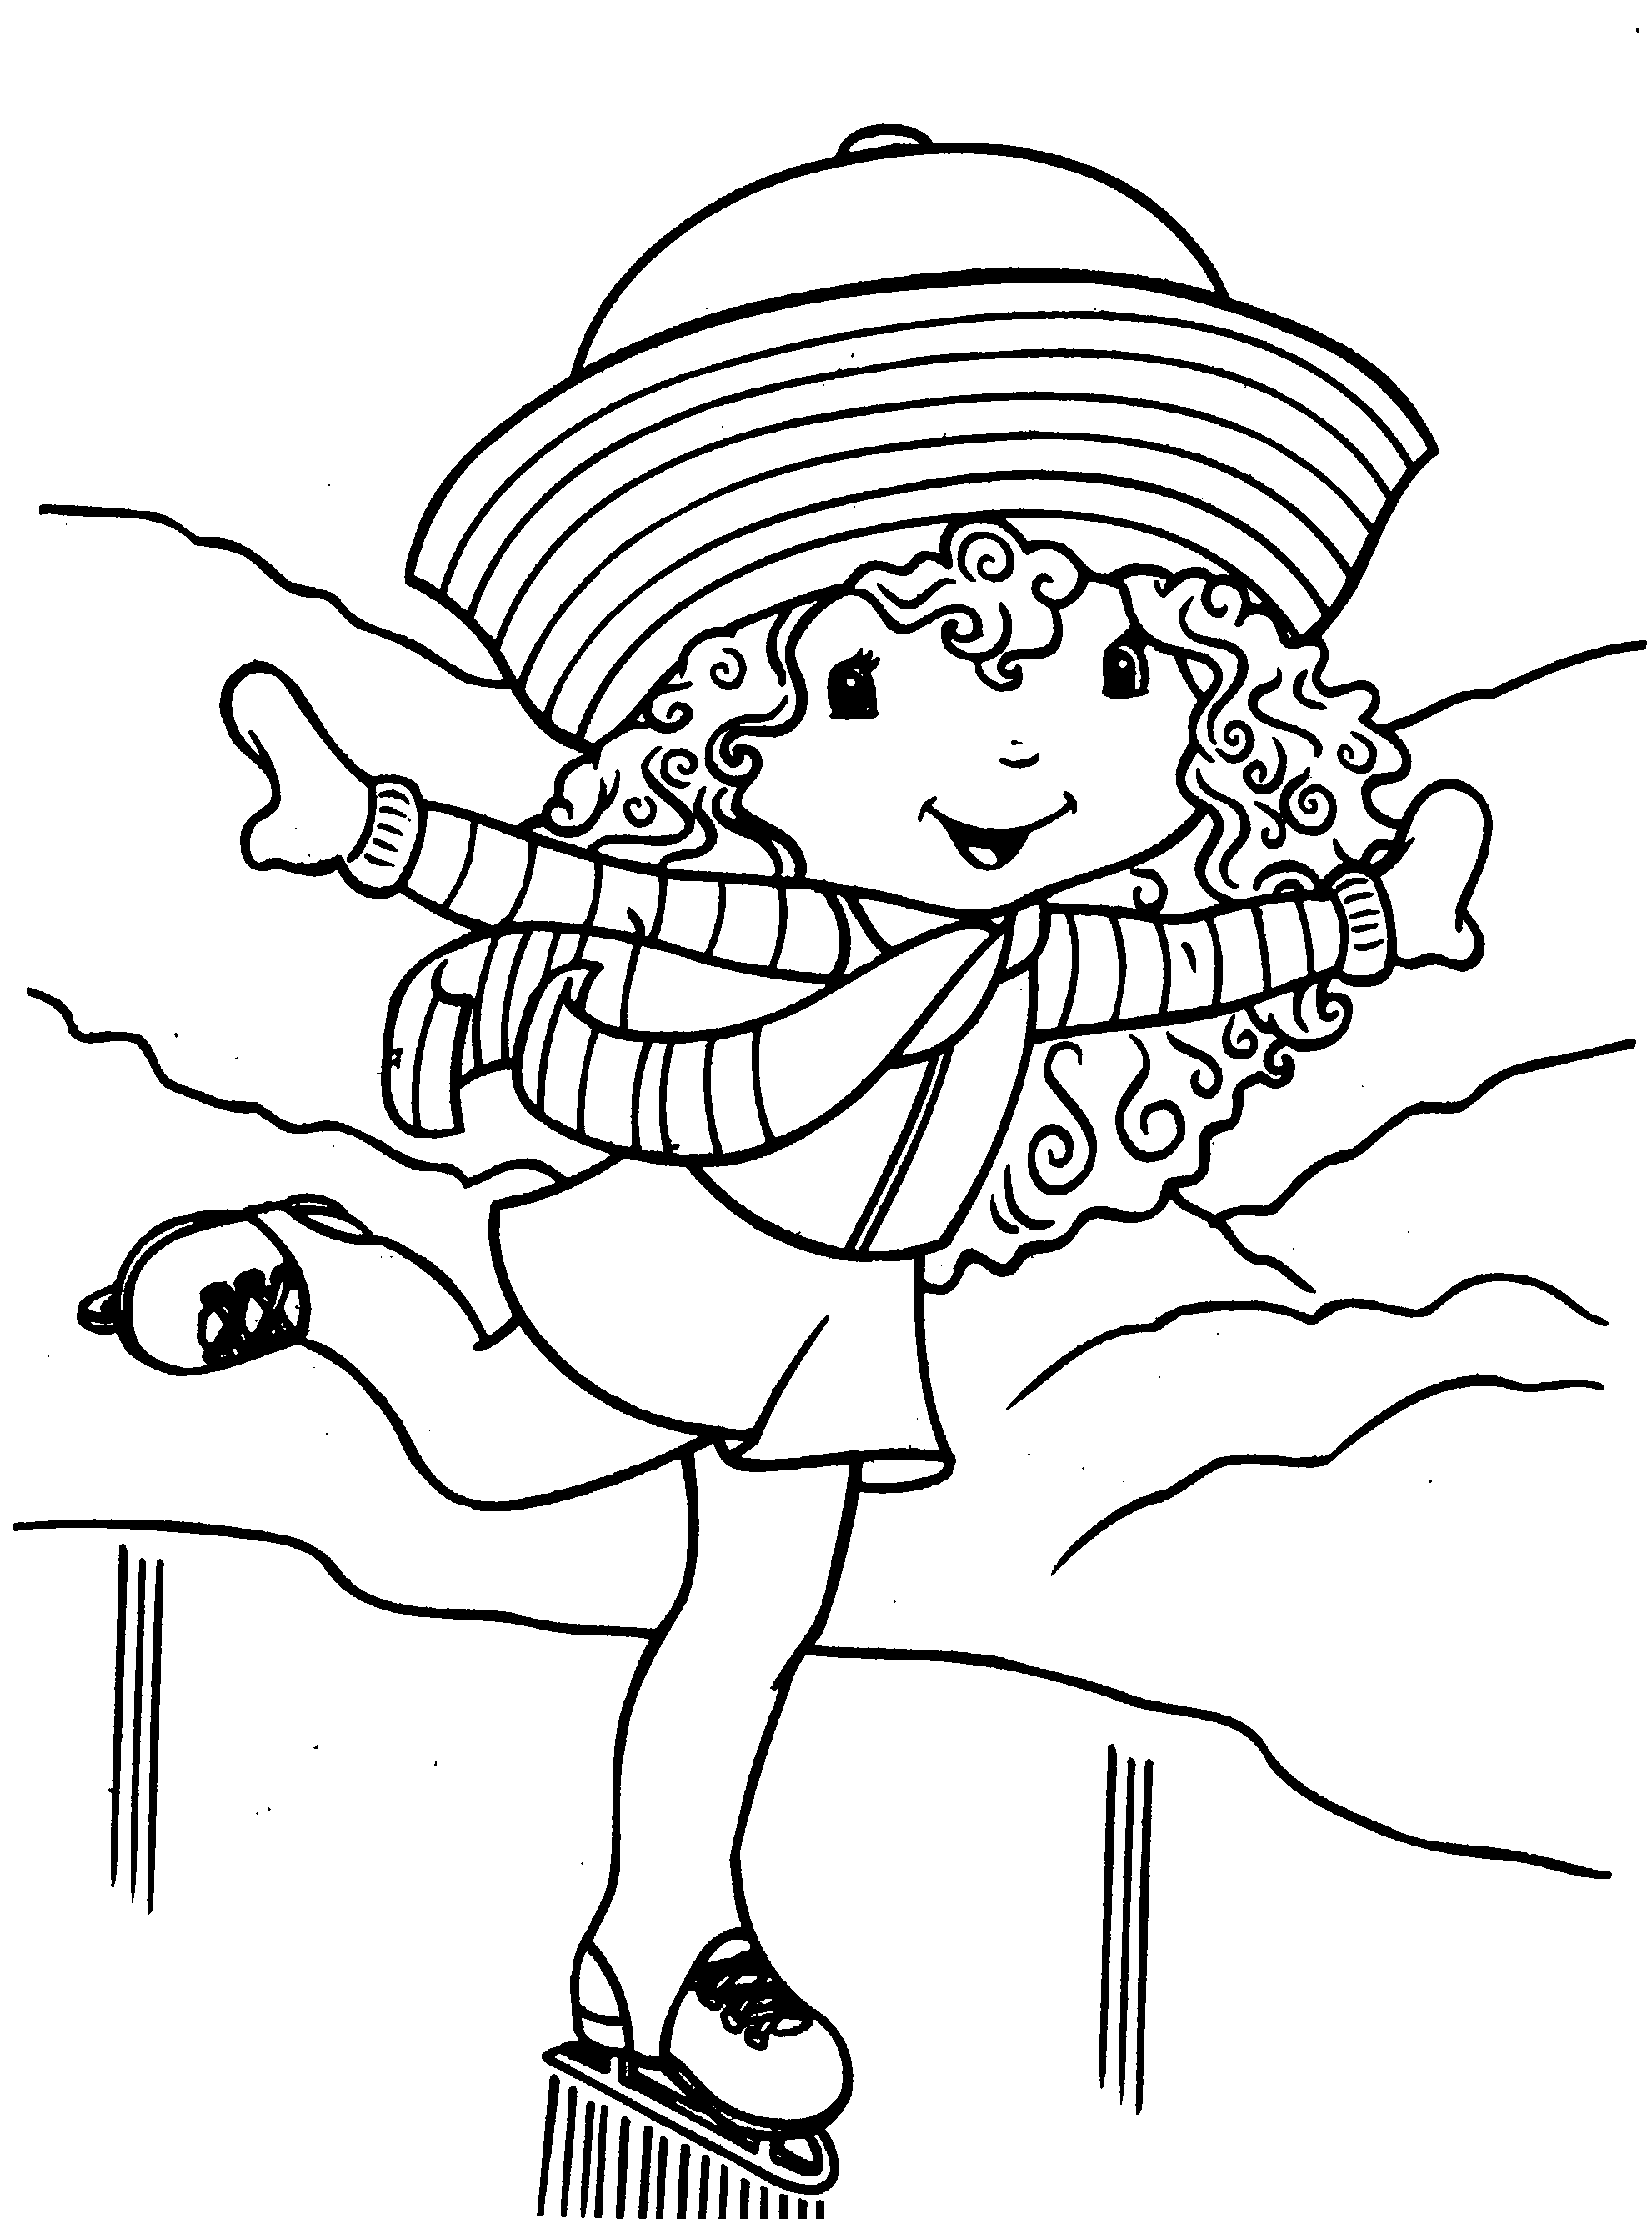 Strawberry Ice Skating Coloring Page